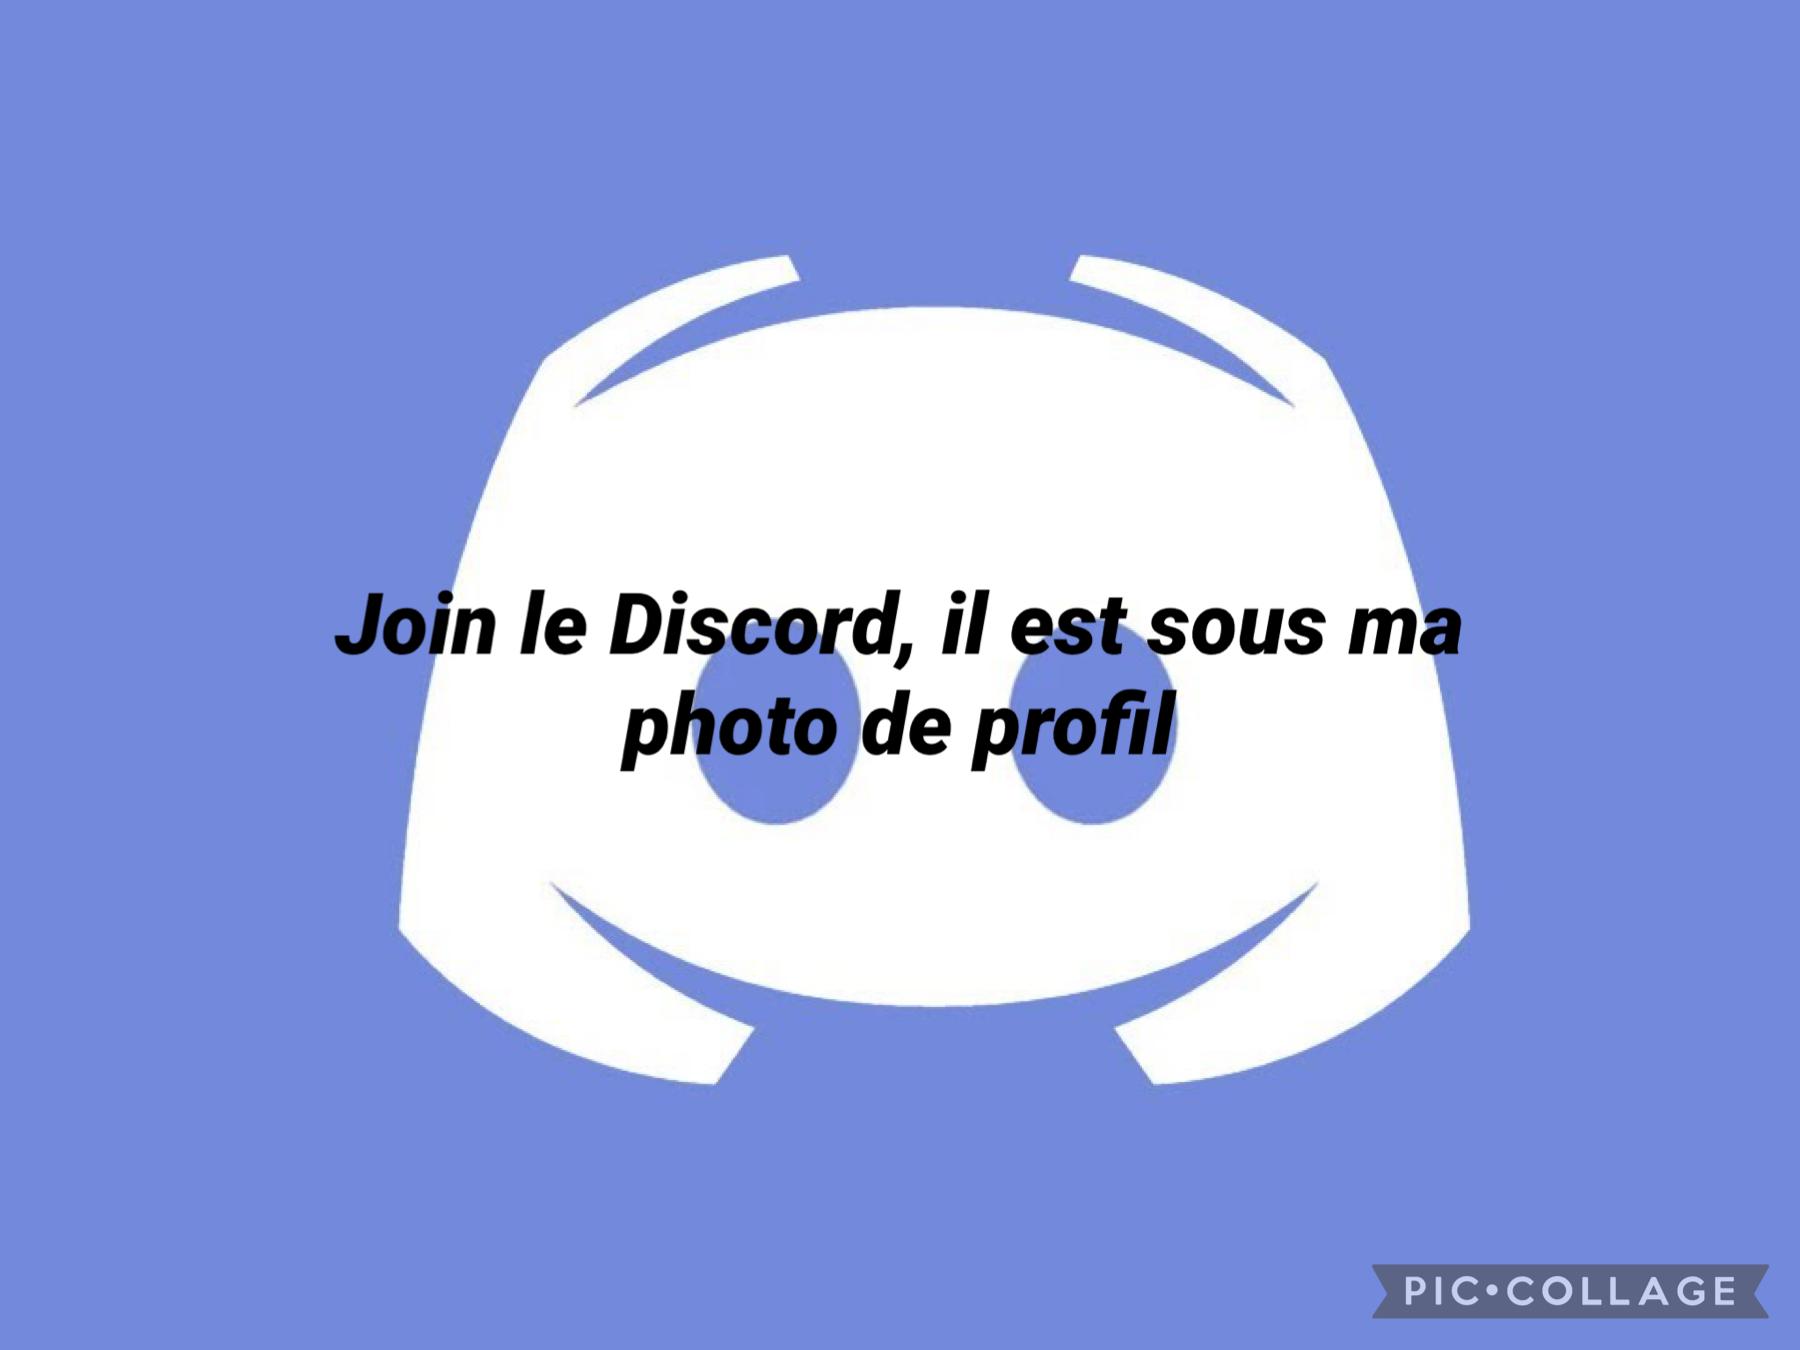 Join le Discord